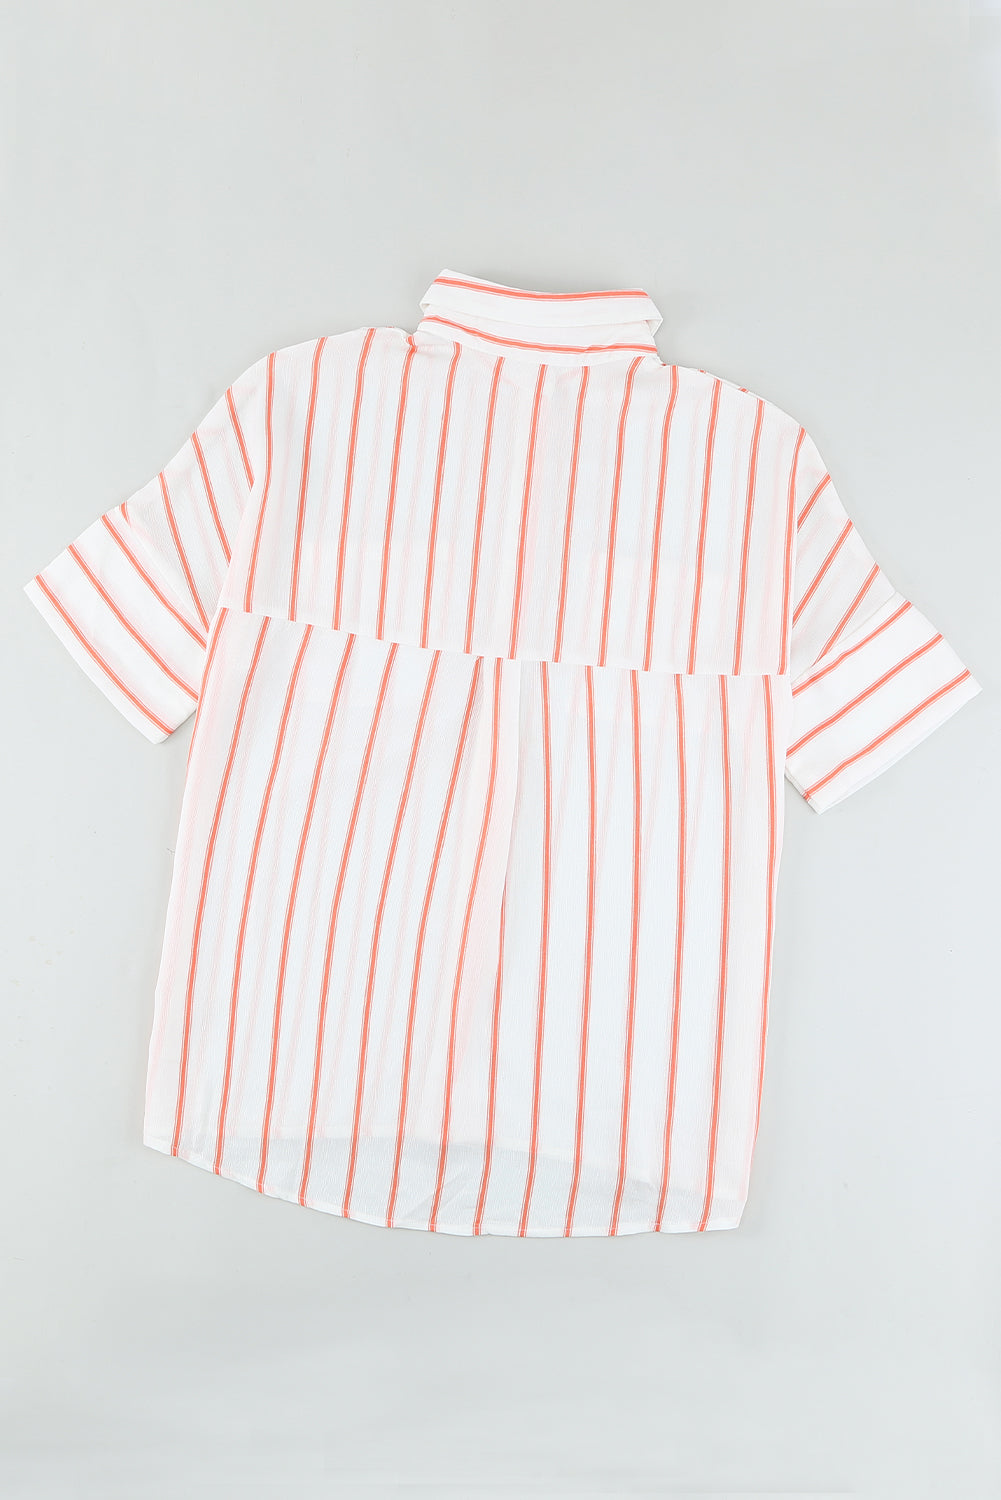 Black Striped Casual Short Sleeve Shirt with Pocket